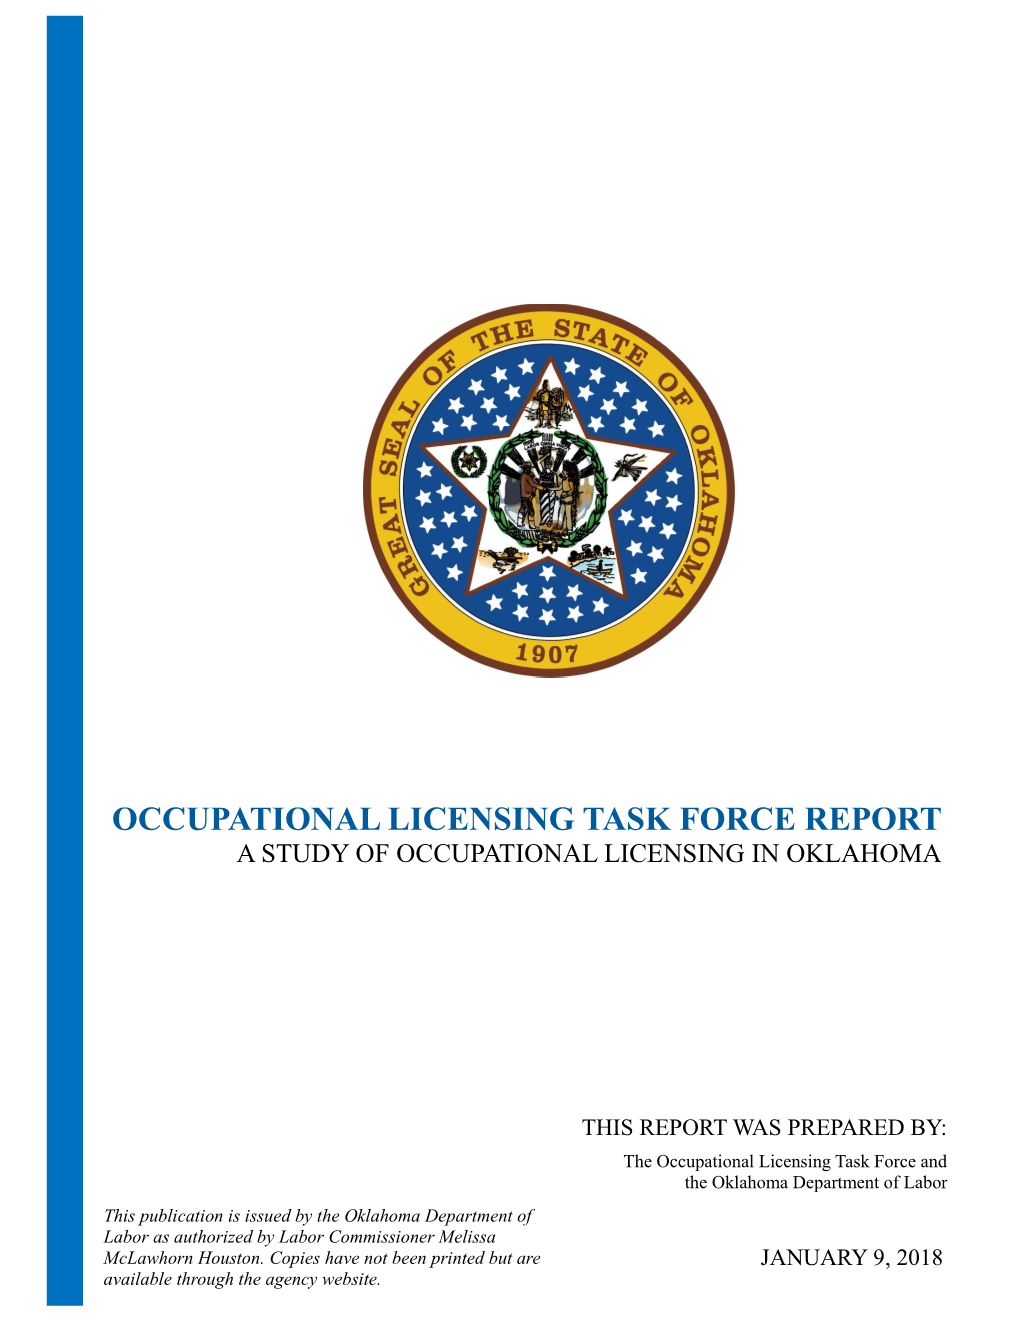 Occupational Licensing Task Force Report a Study of Occupational Licensing in Oklahoma